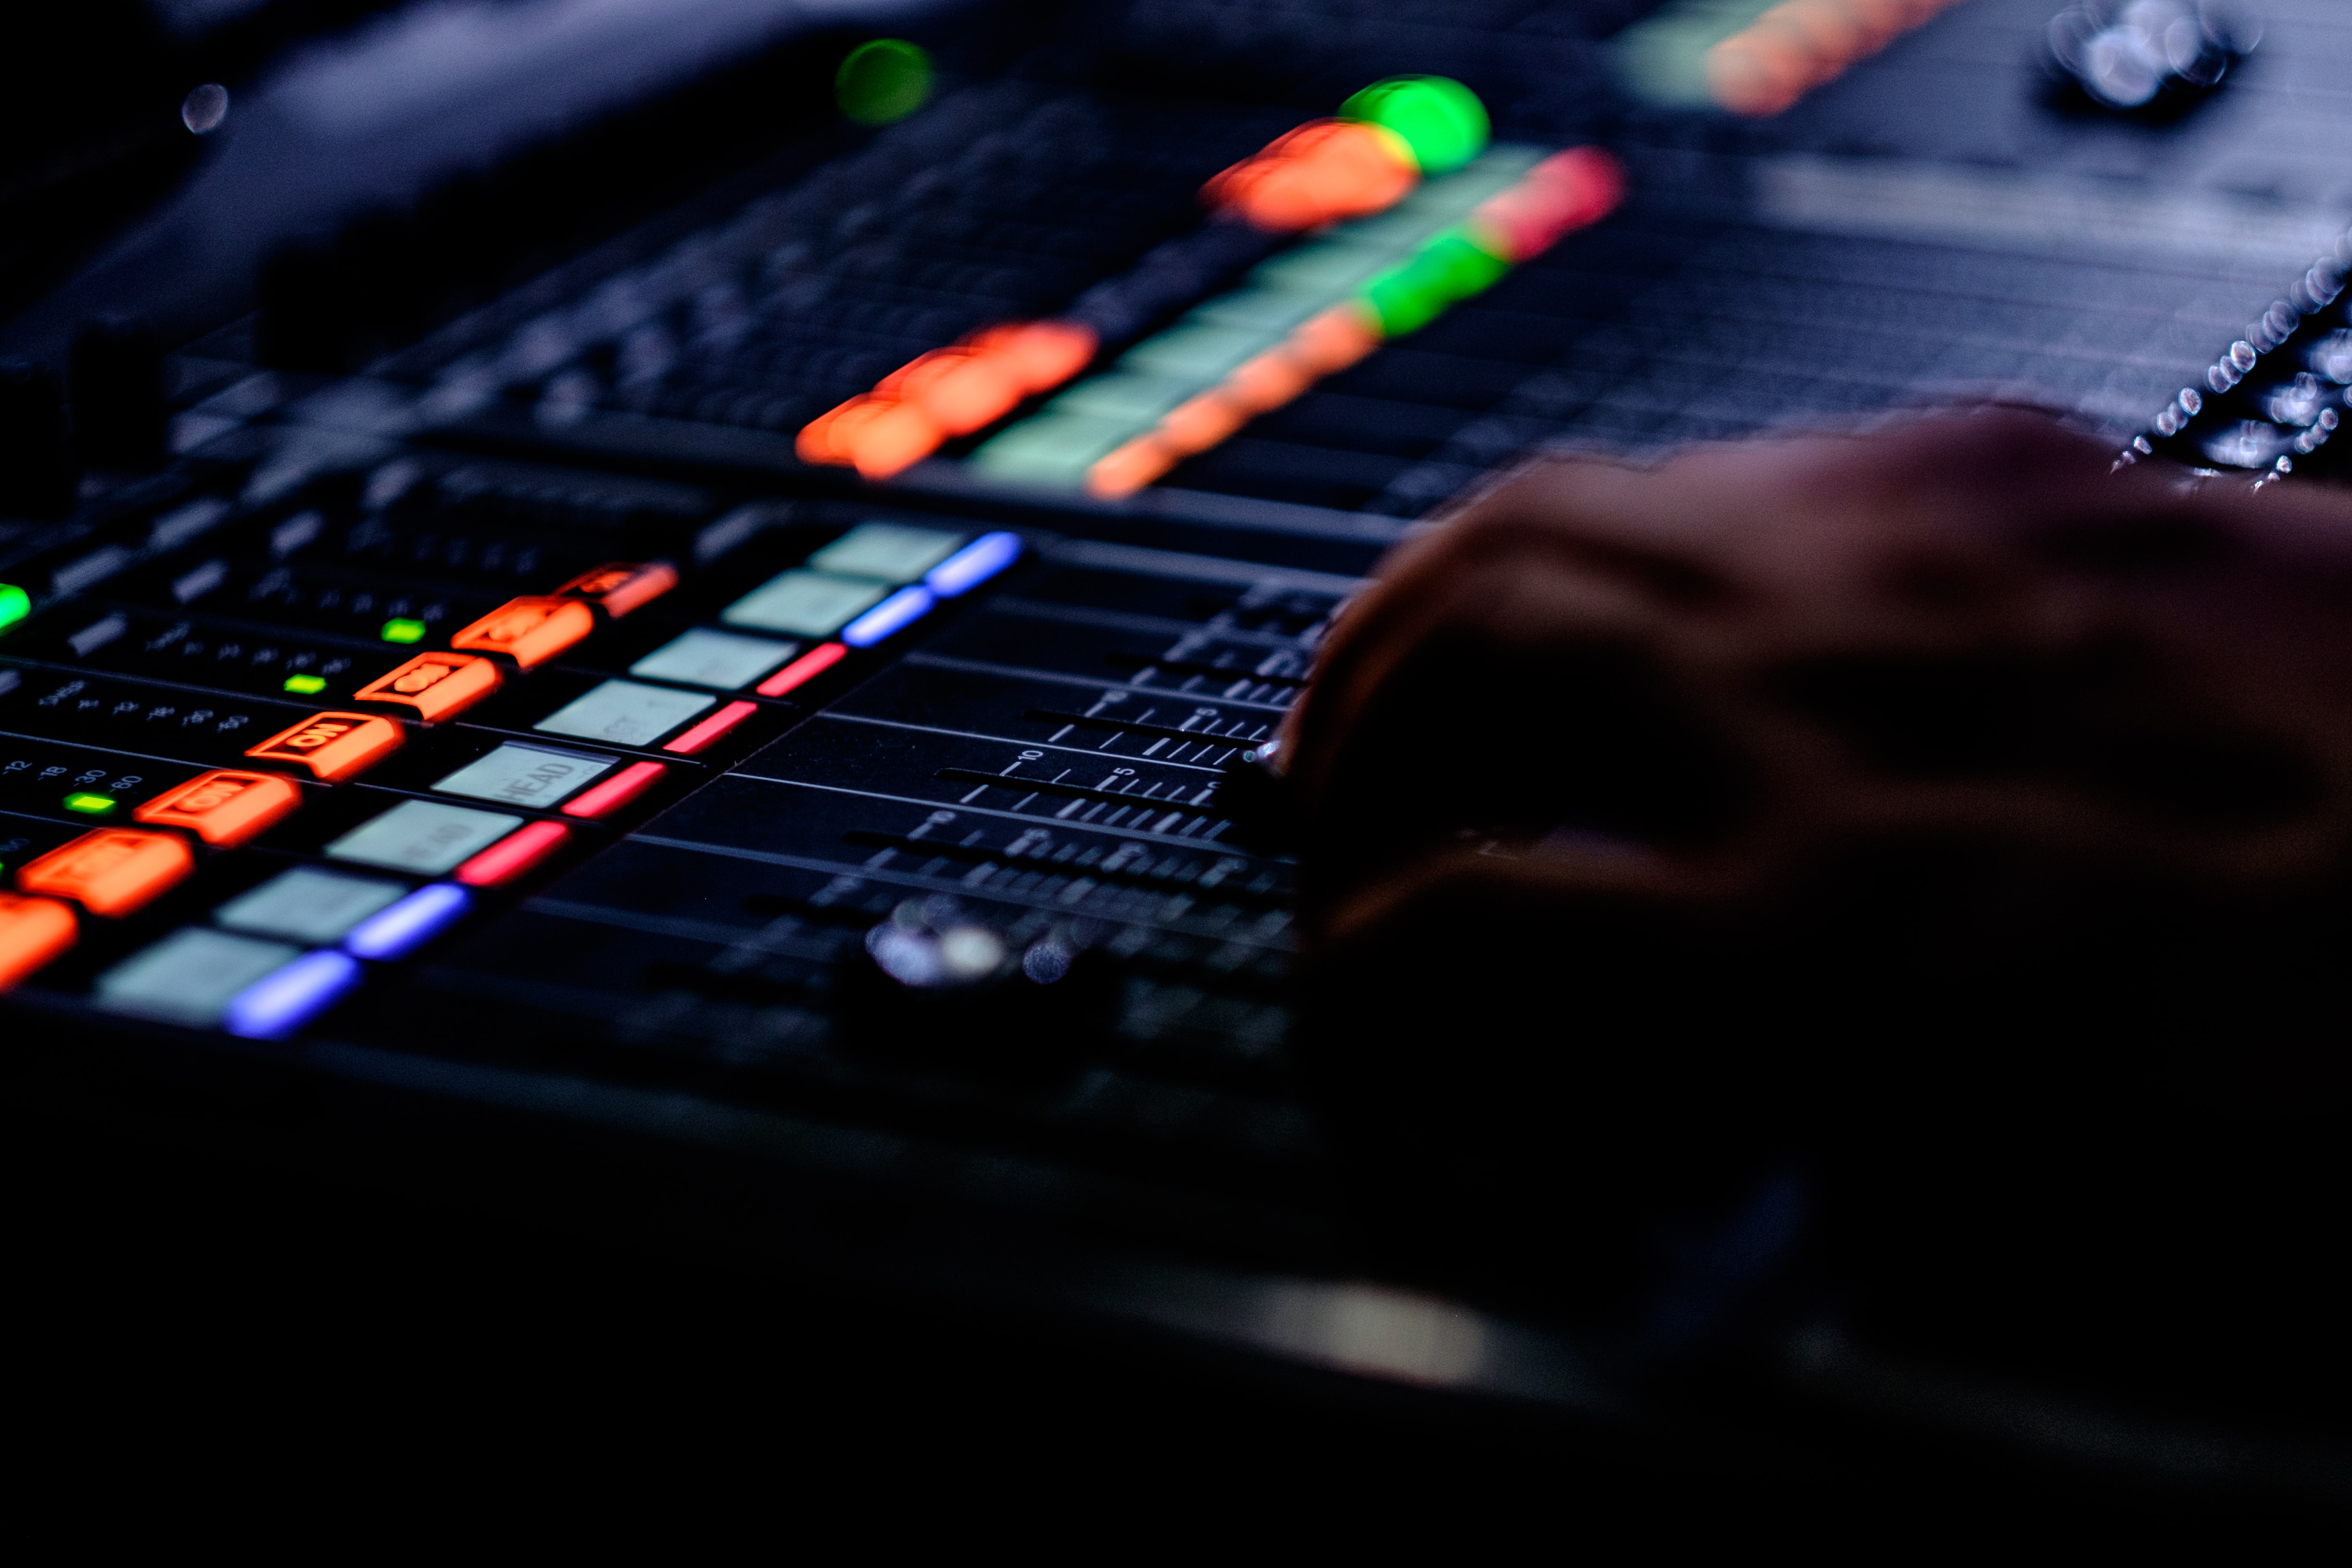 Native Instruments shares sold to Francisco Partners